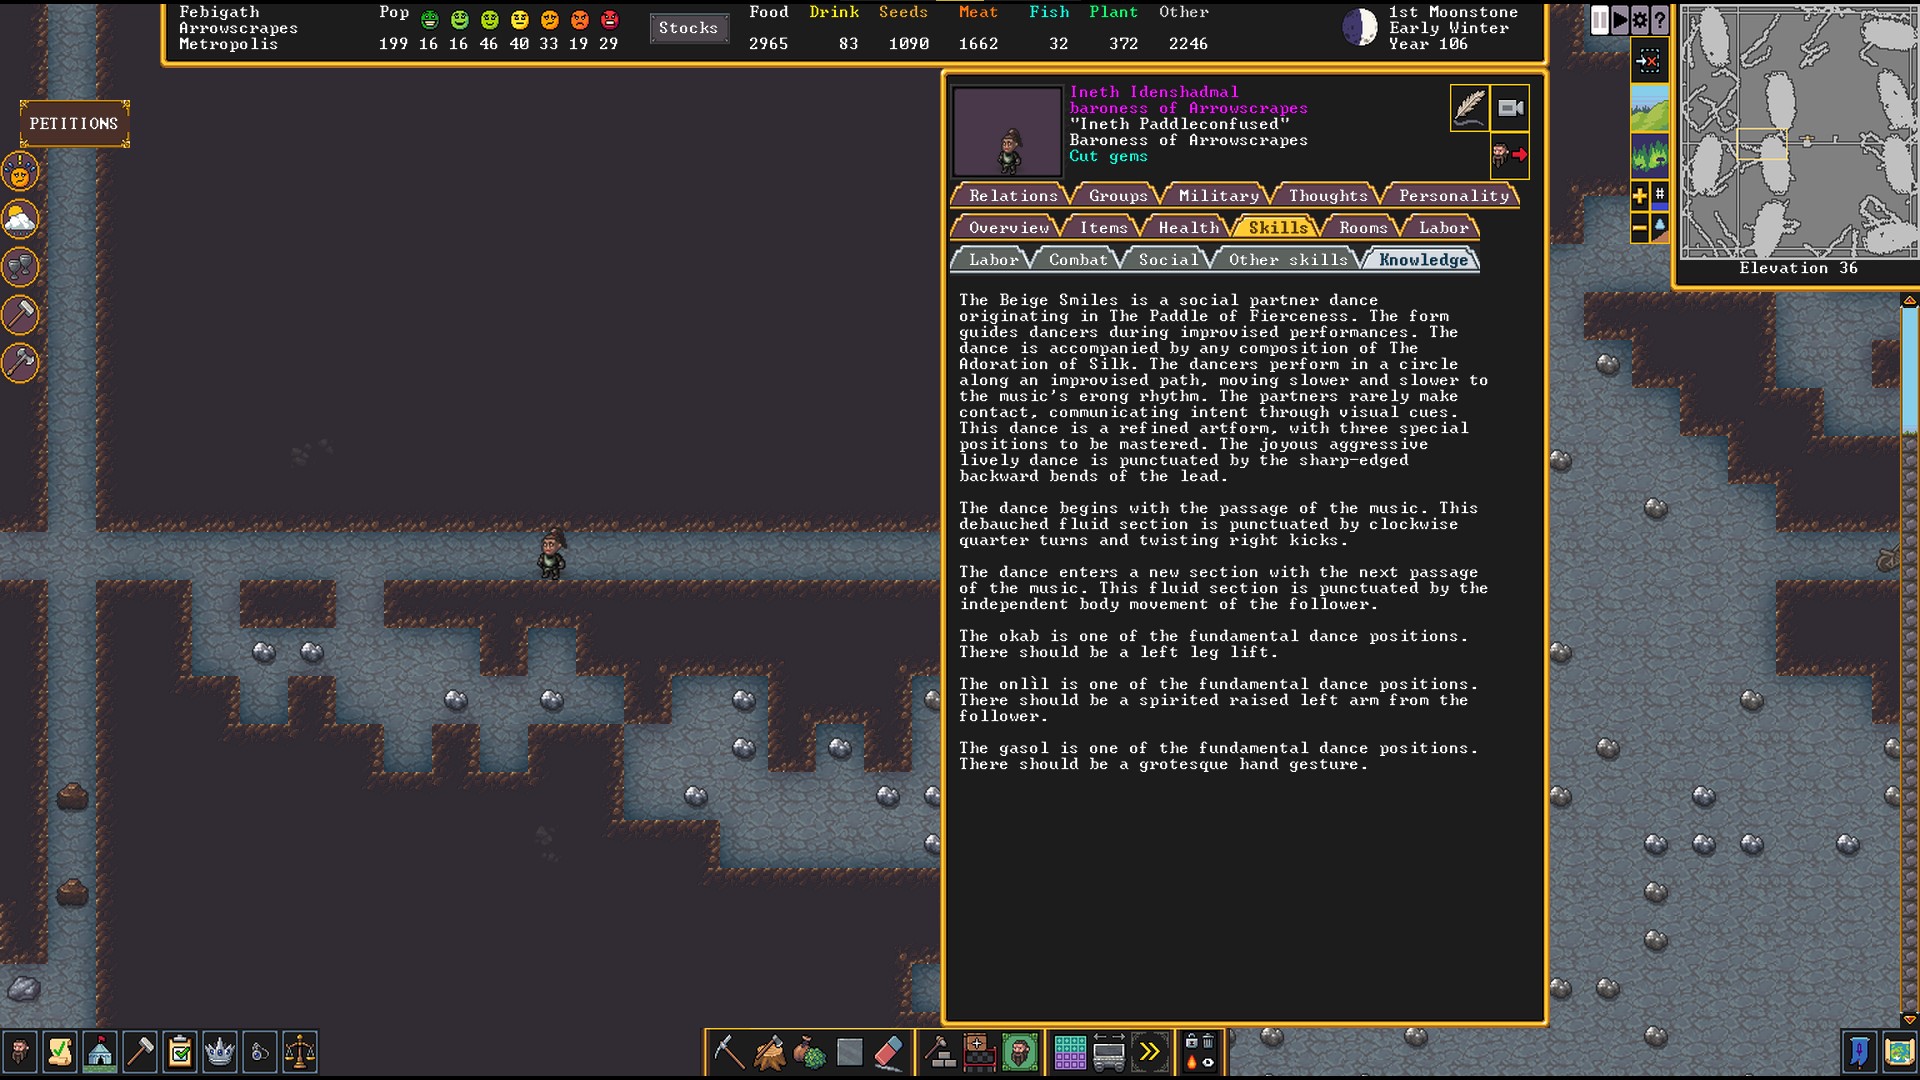 Future Dwarf Fortress ‘creative mode’ will let you sculpt whole worlds, dream up homemade gods